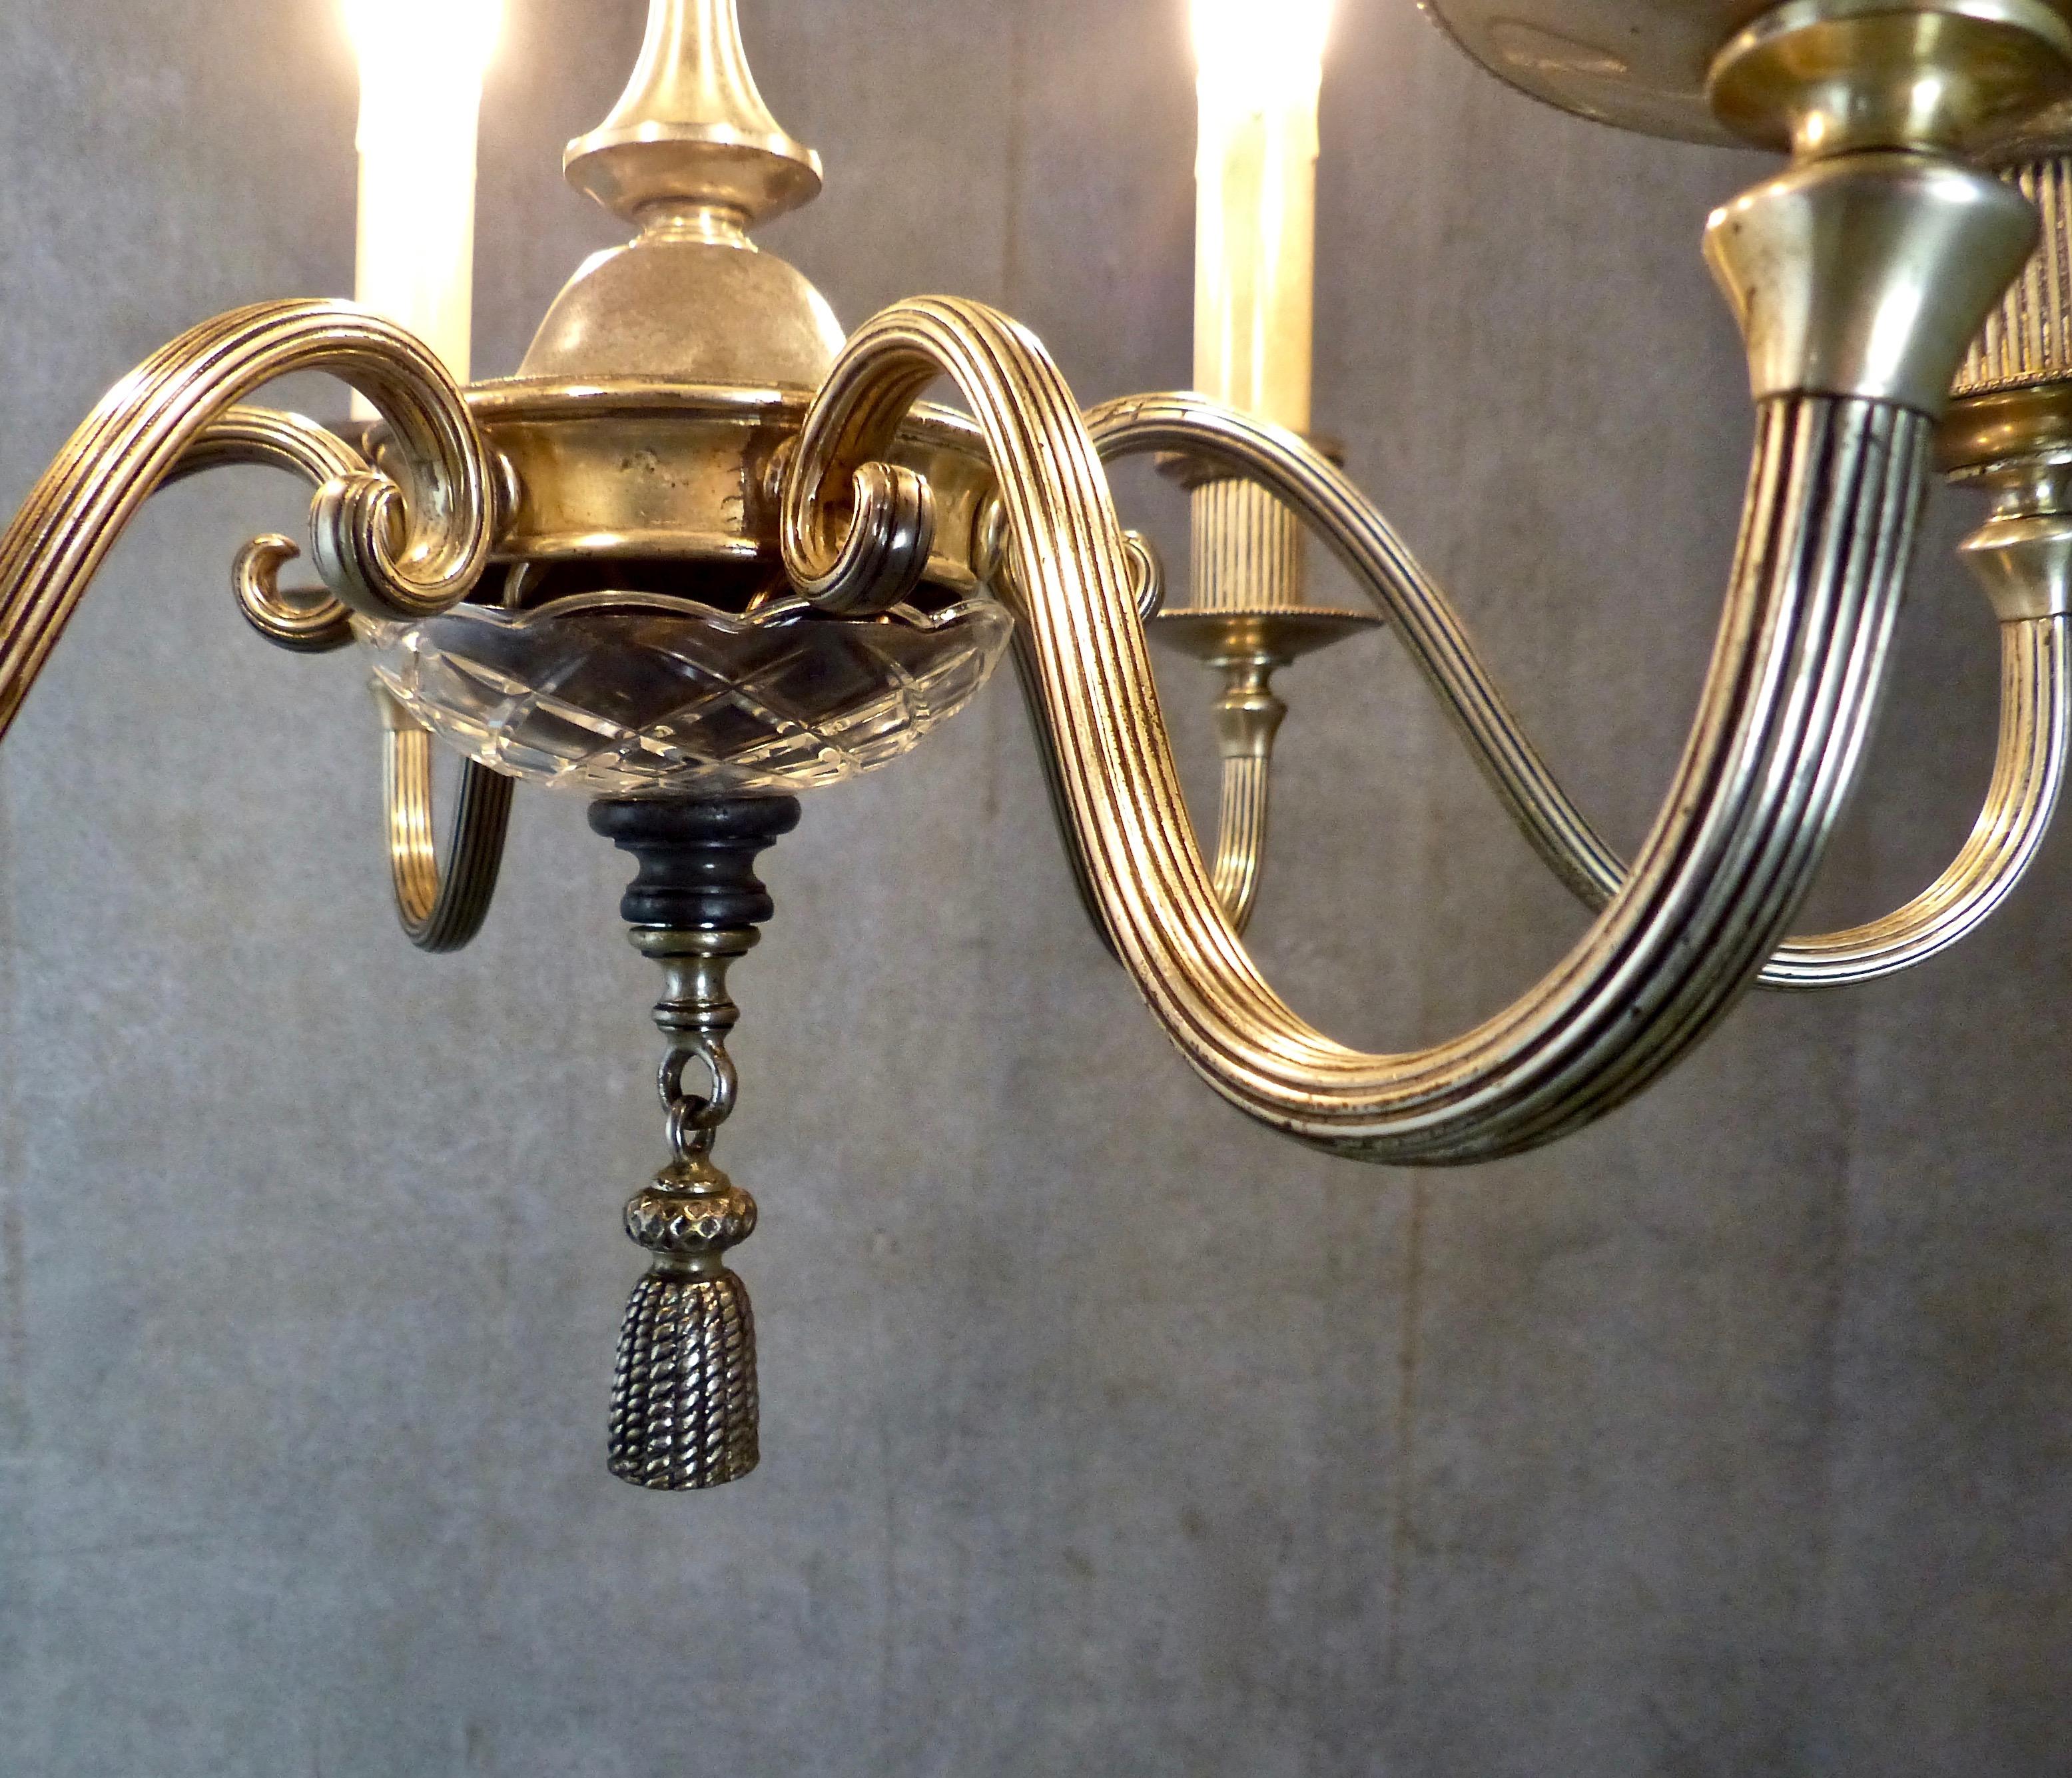 A silver-gilded, small chandelier from the Art Deco period. Acquired in New York City, and fully re-wired/restored and CSA approved to current electrical standards. An agreeable chandelier that looks good in any location, adding just the right